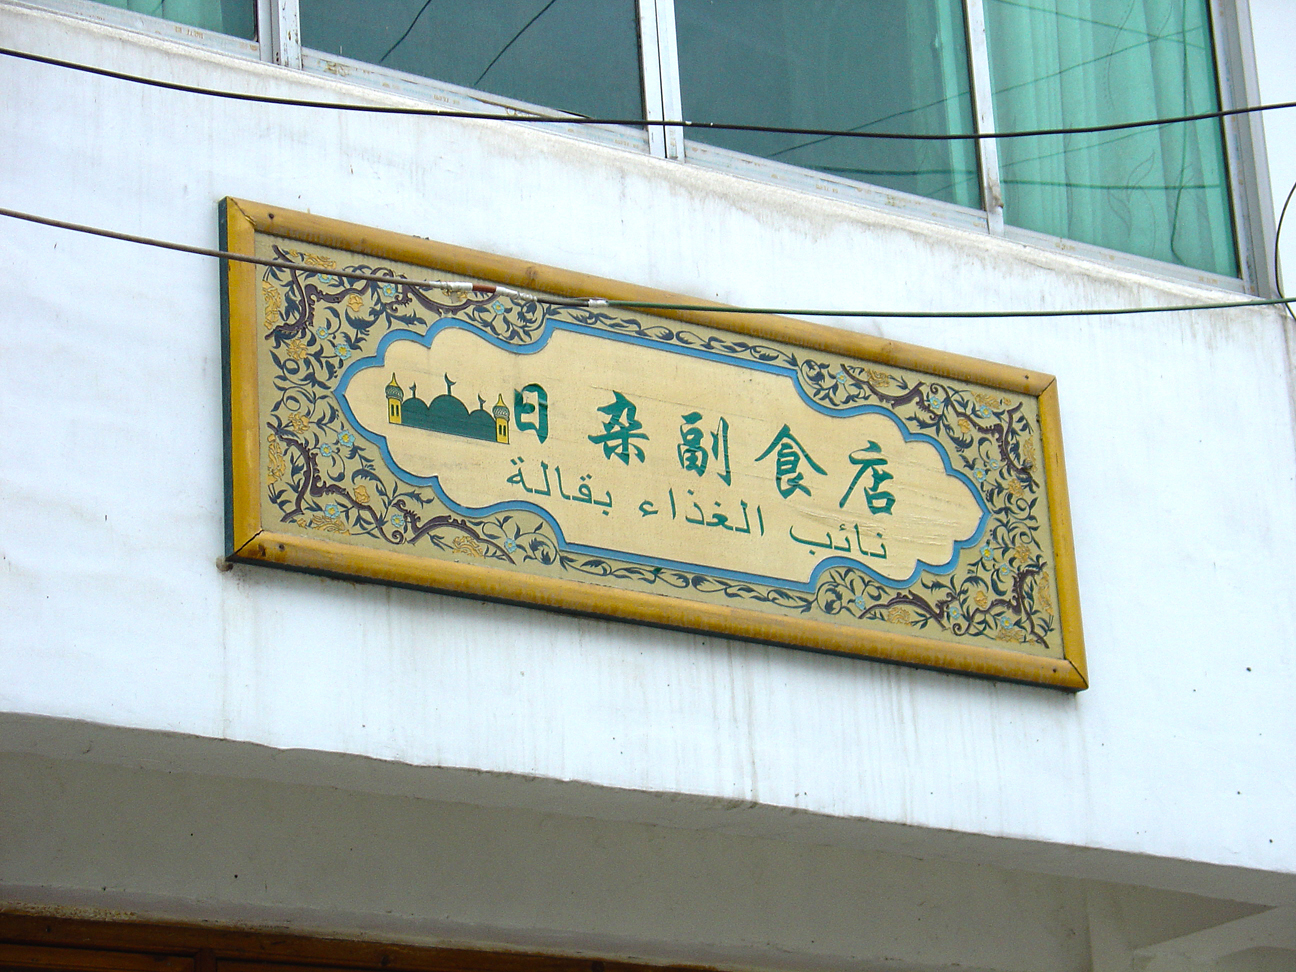 The small community of Huizu (回族) have their signs in two languages.